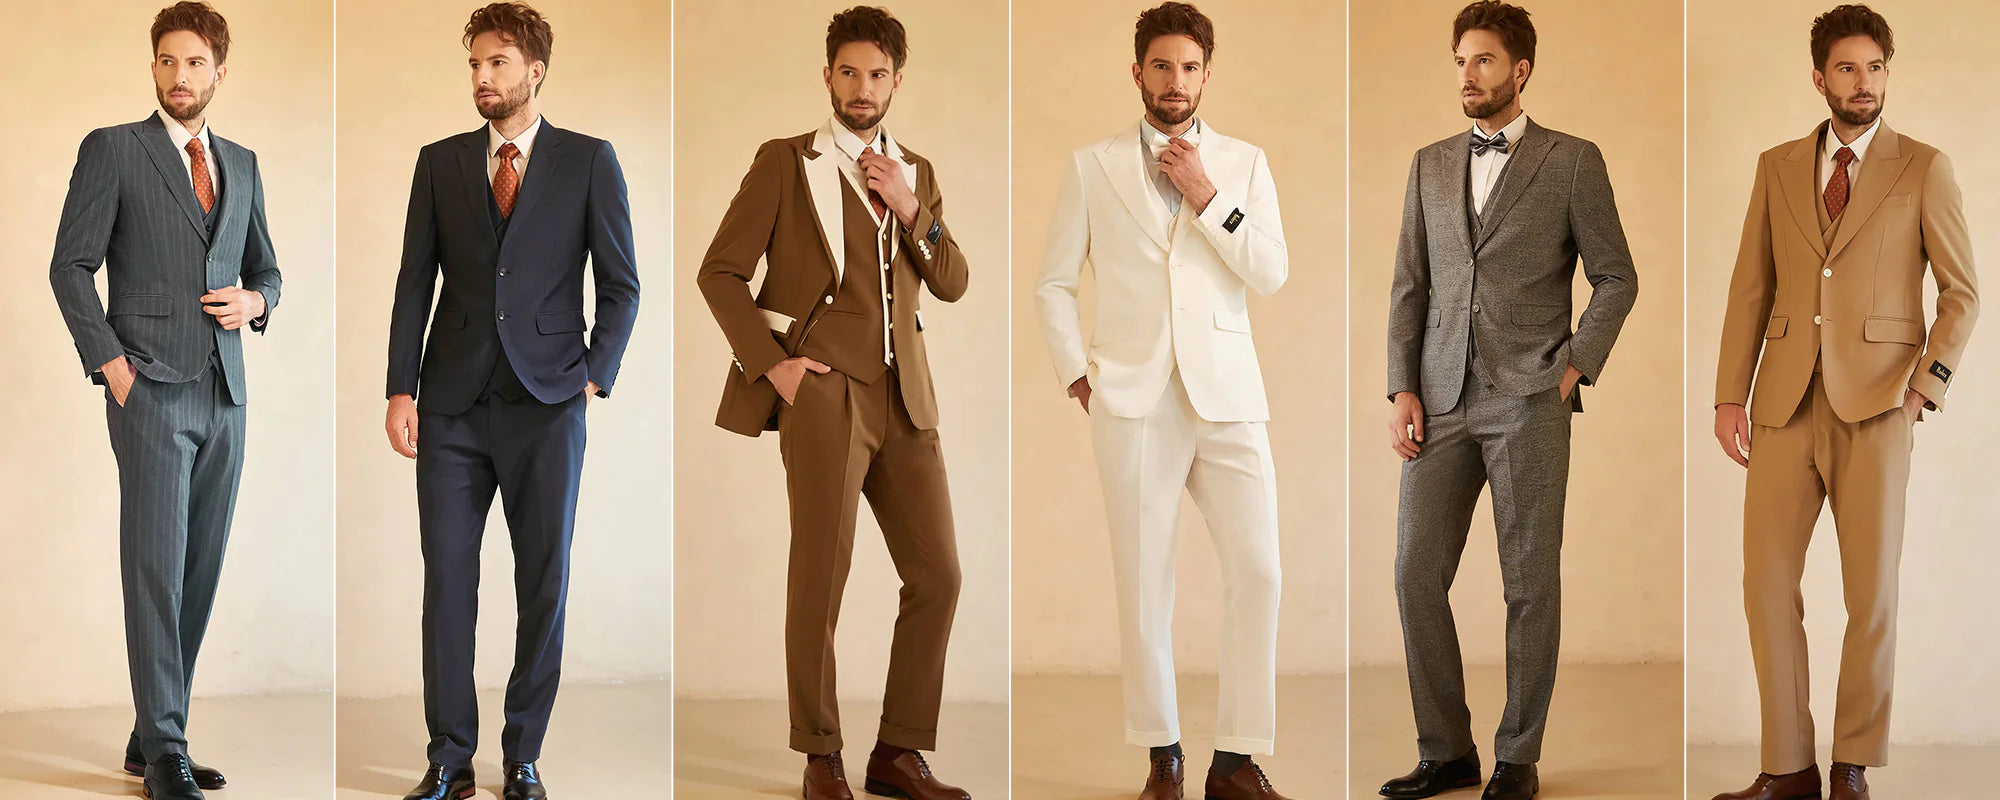 What Are the Key Differences in Men's Suit Styles?